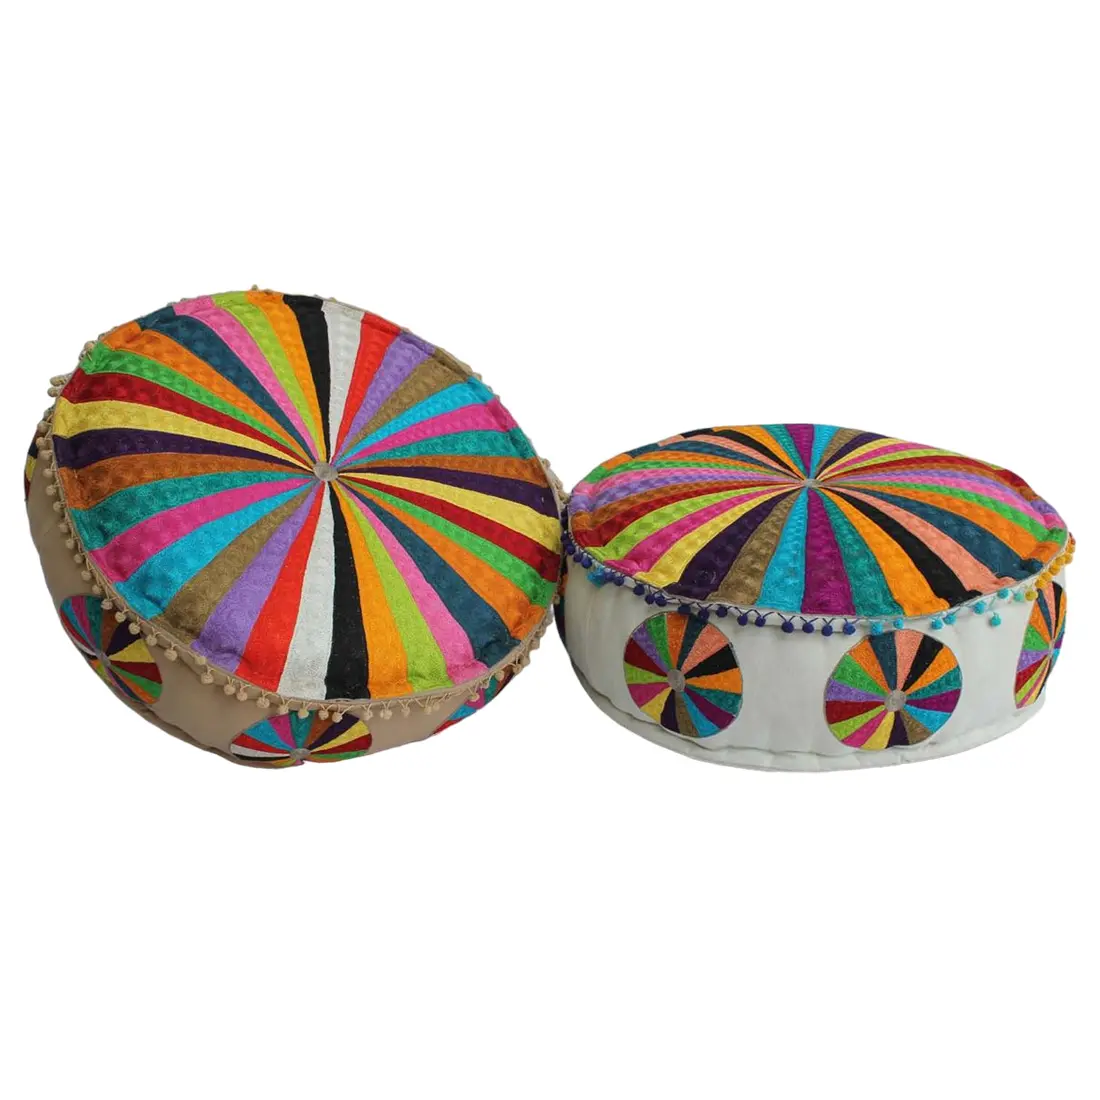 Indian Made Lifestyle Products Hand Embroidered Poufs Colorful Home Decor Tribal Embroidered Pouf